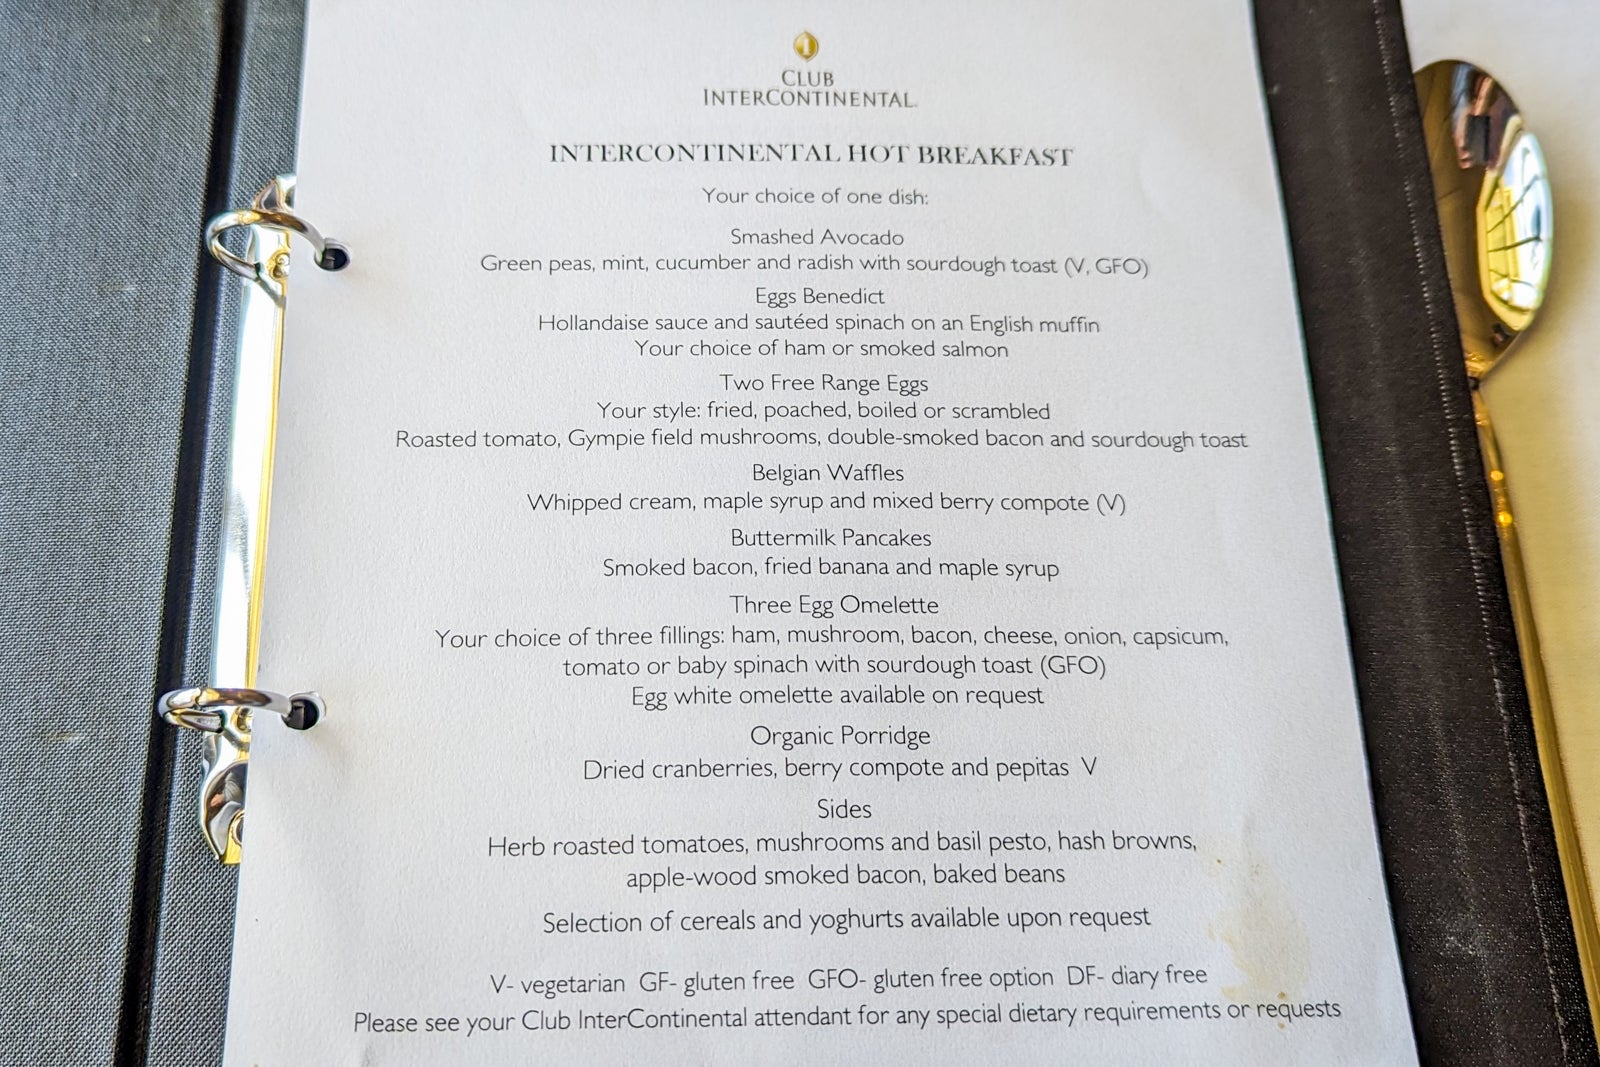 Menu in the Club InterContinental Lounge at the InterContinental Sanctuary Cove Resort